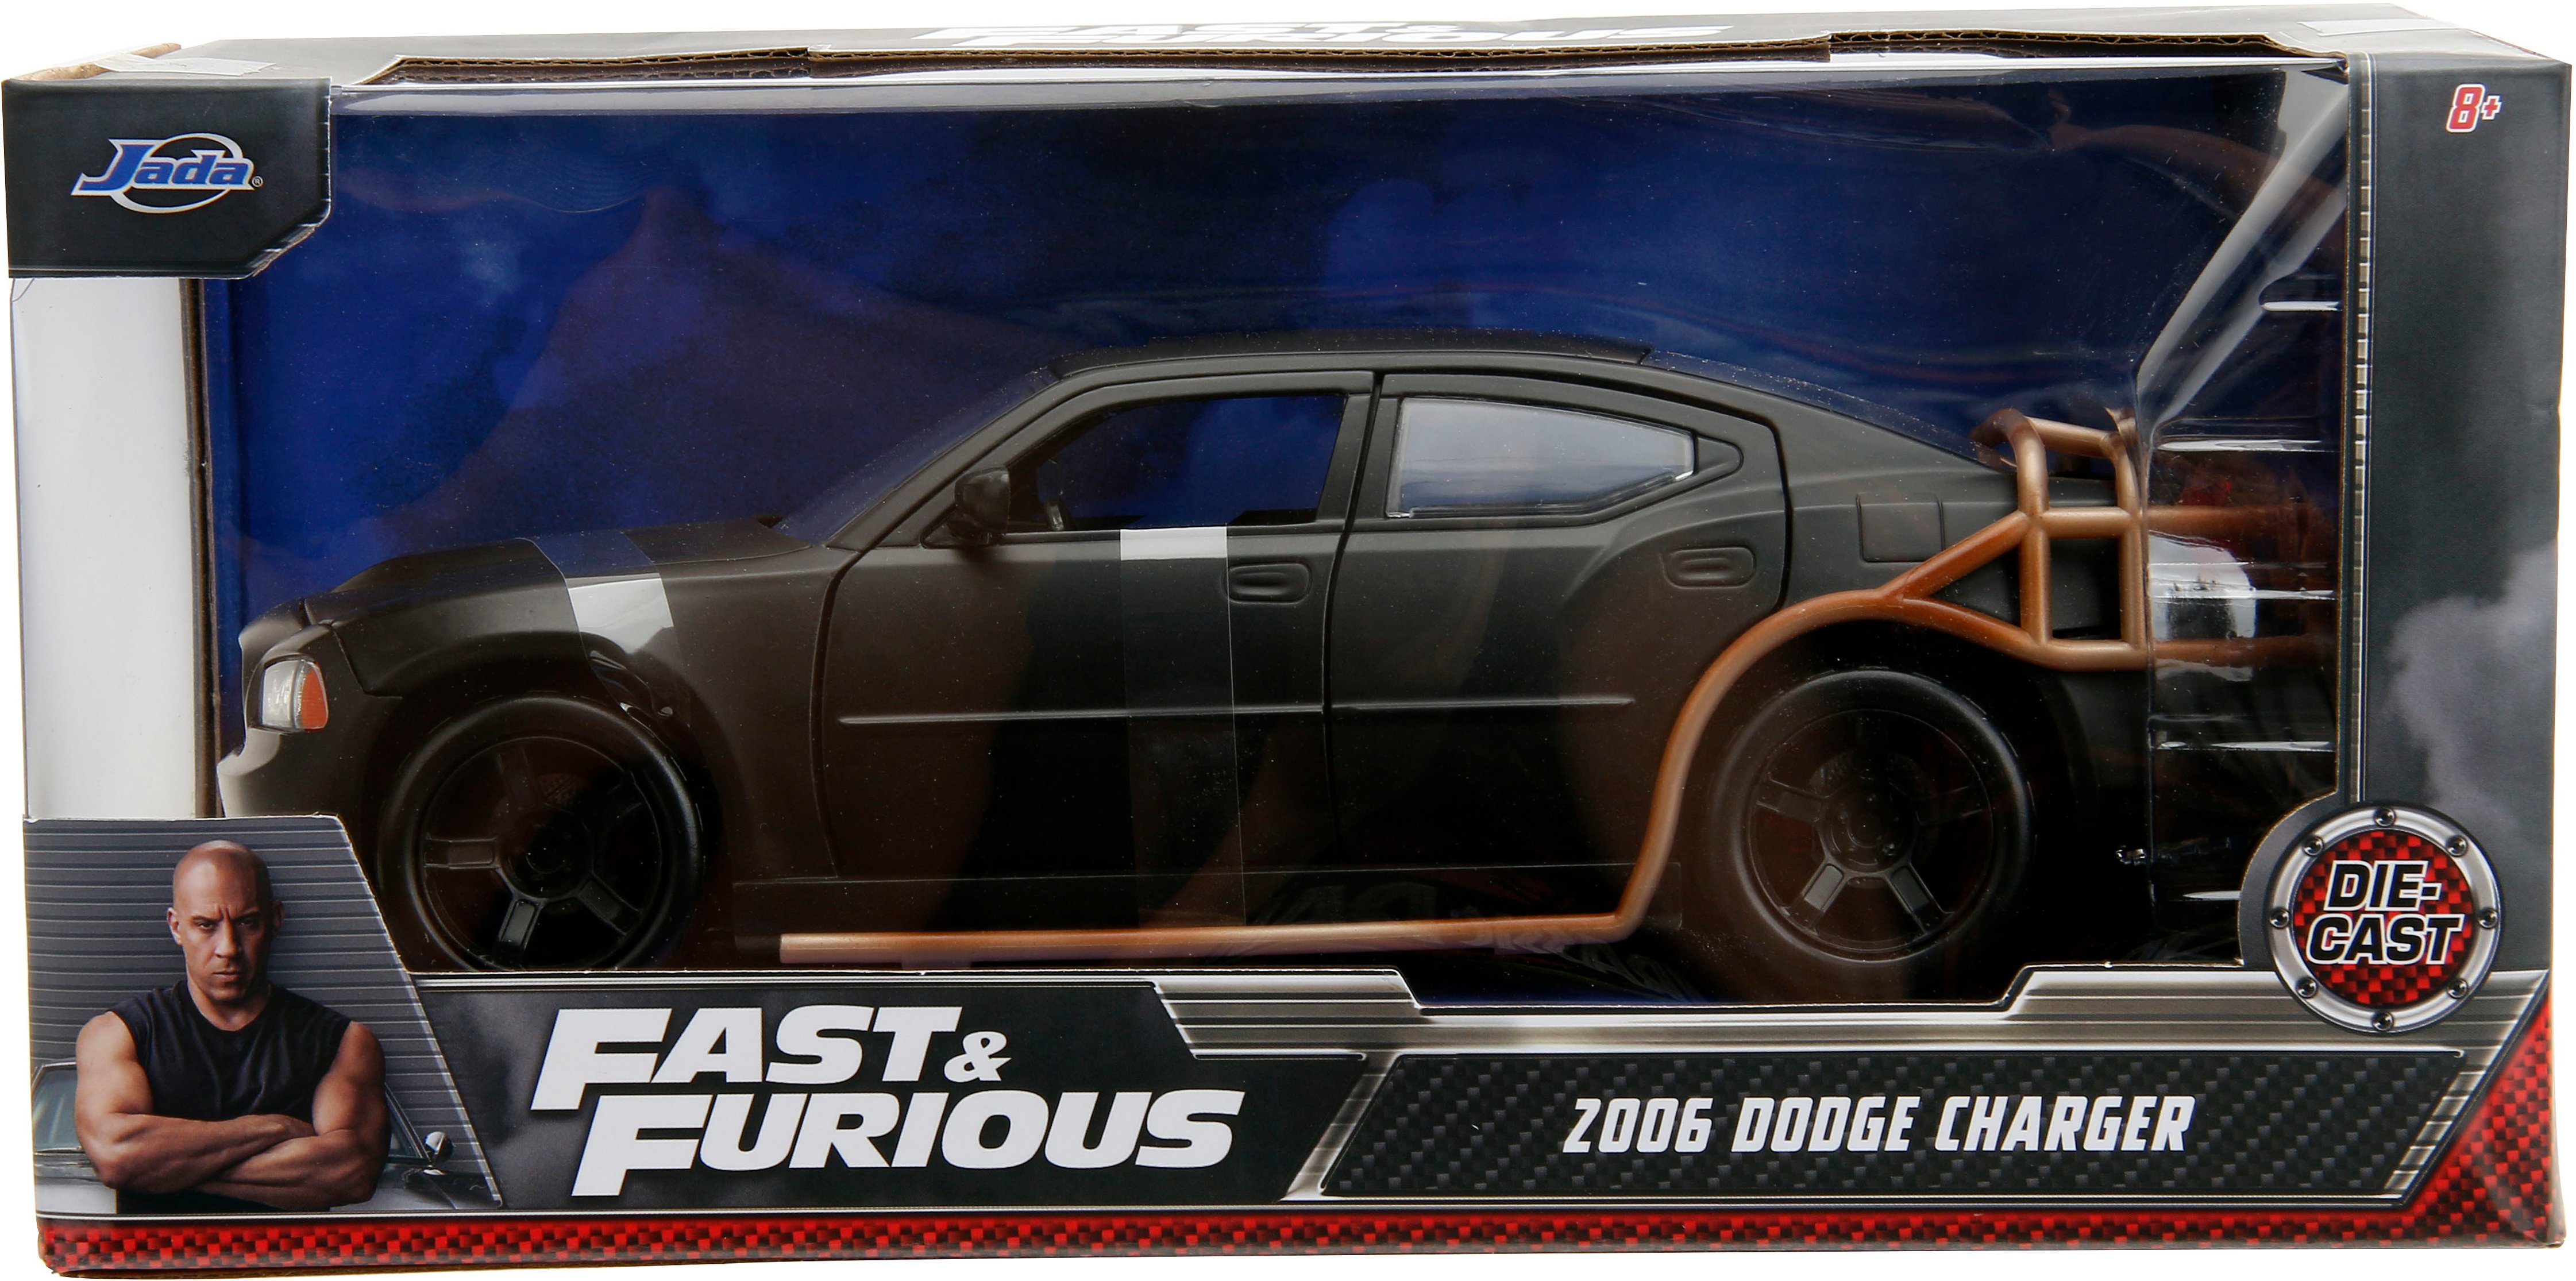 Funko Pop! Rides Fast & Furious 1970 Charger with Dom Toretto